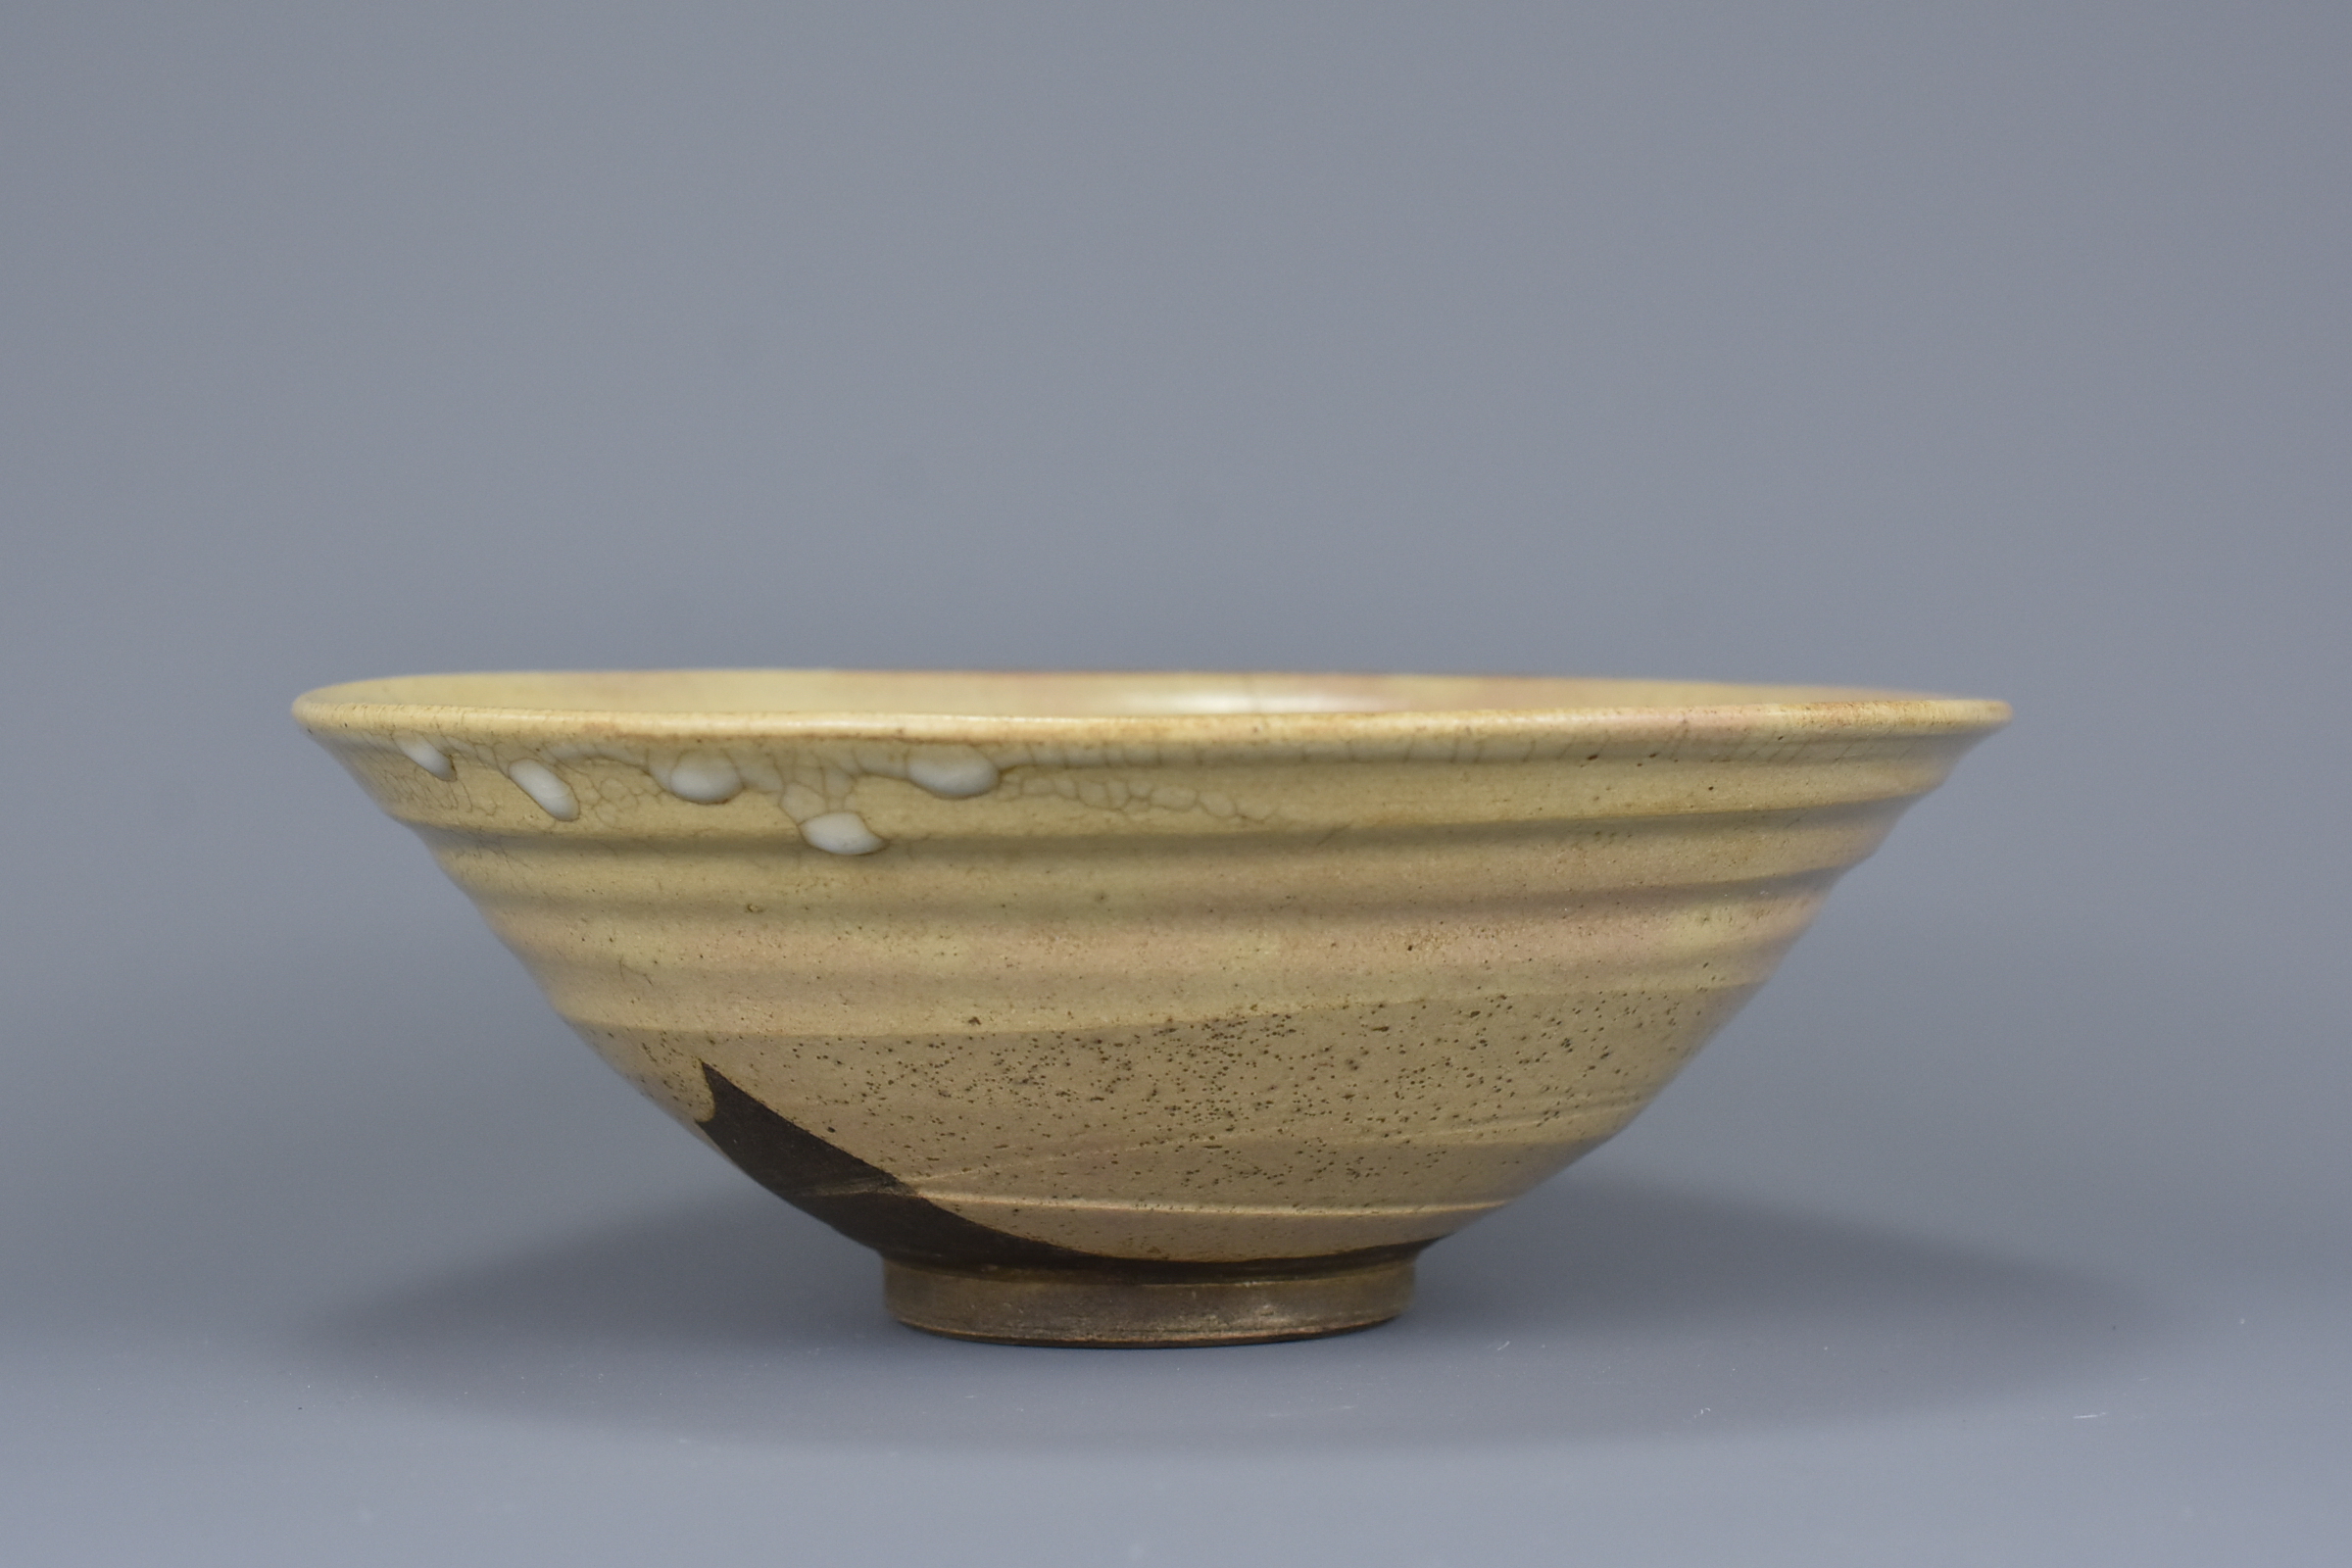 A Japanese or Korean Glazed Stoneware Bowl of Conical Form, 19th Century - Image 7 of 8